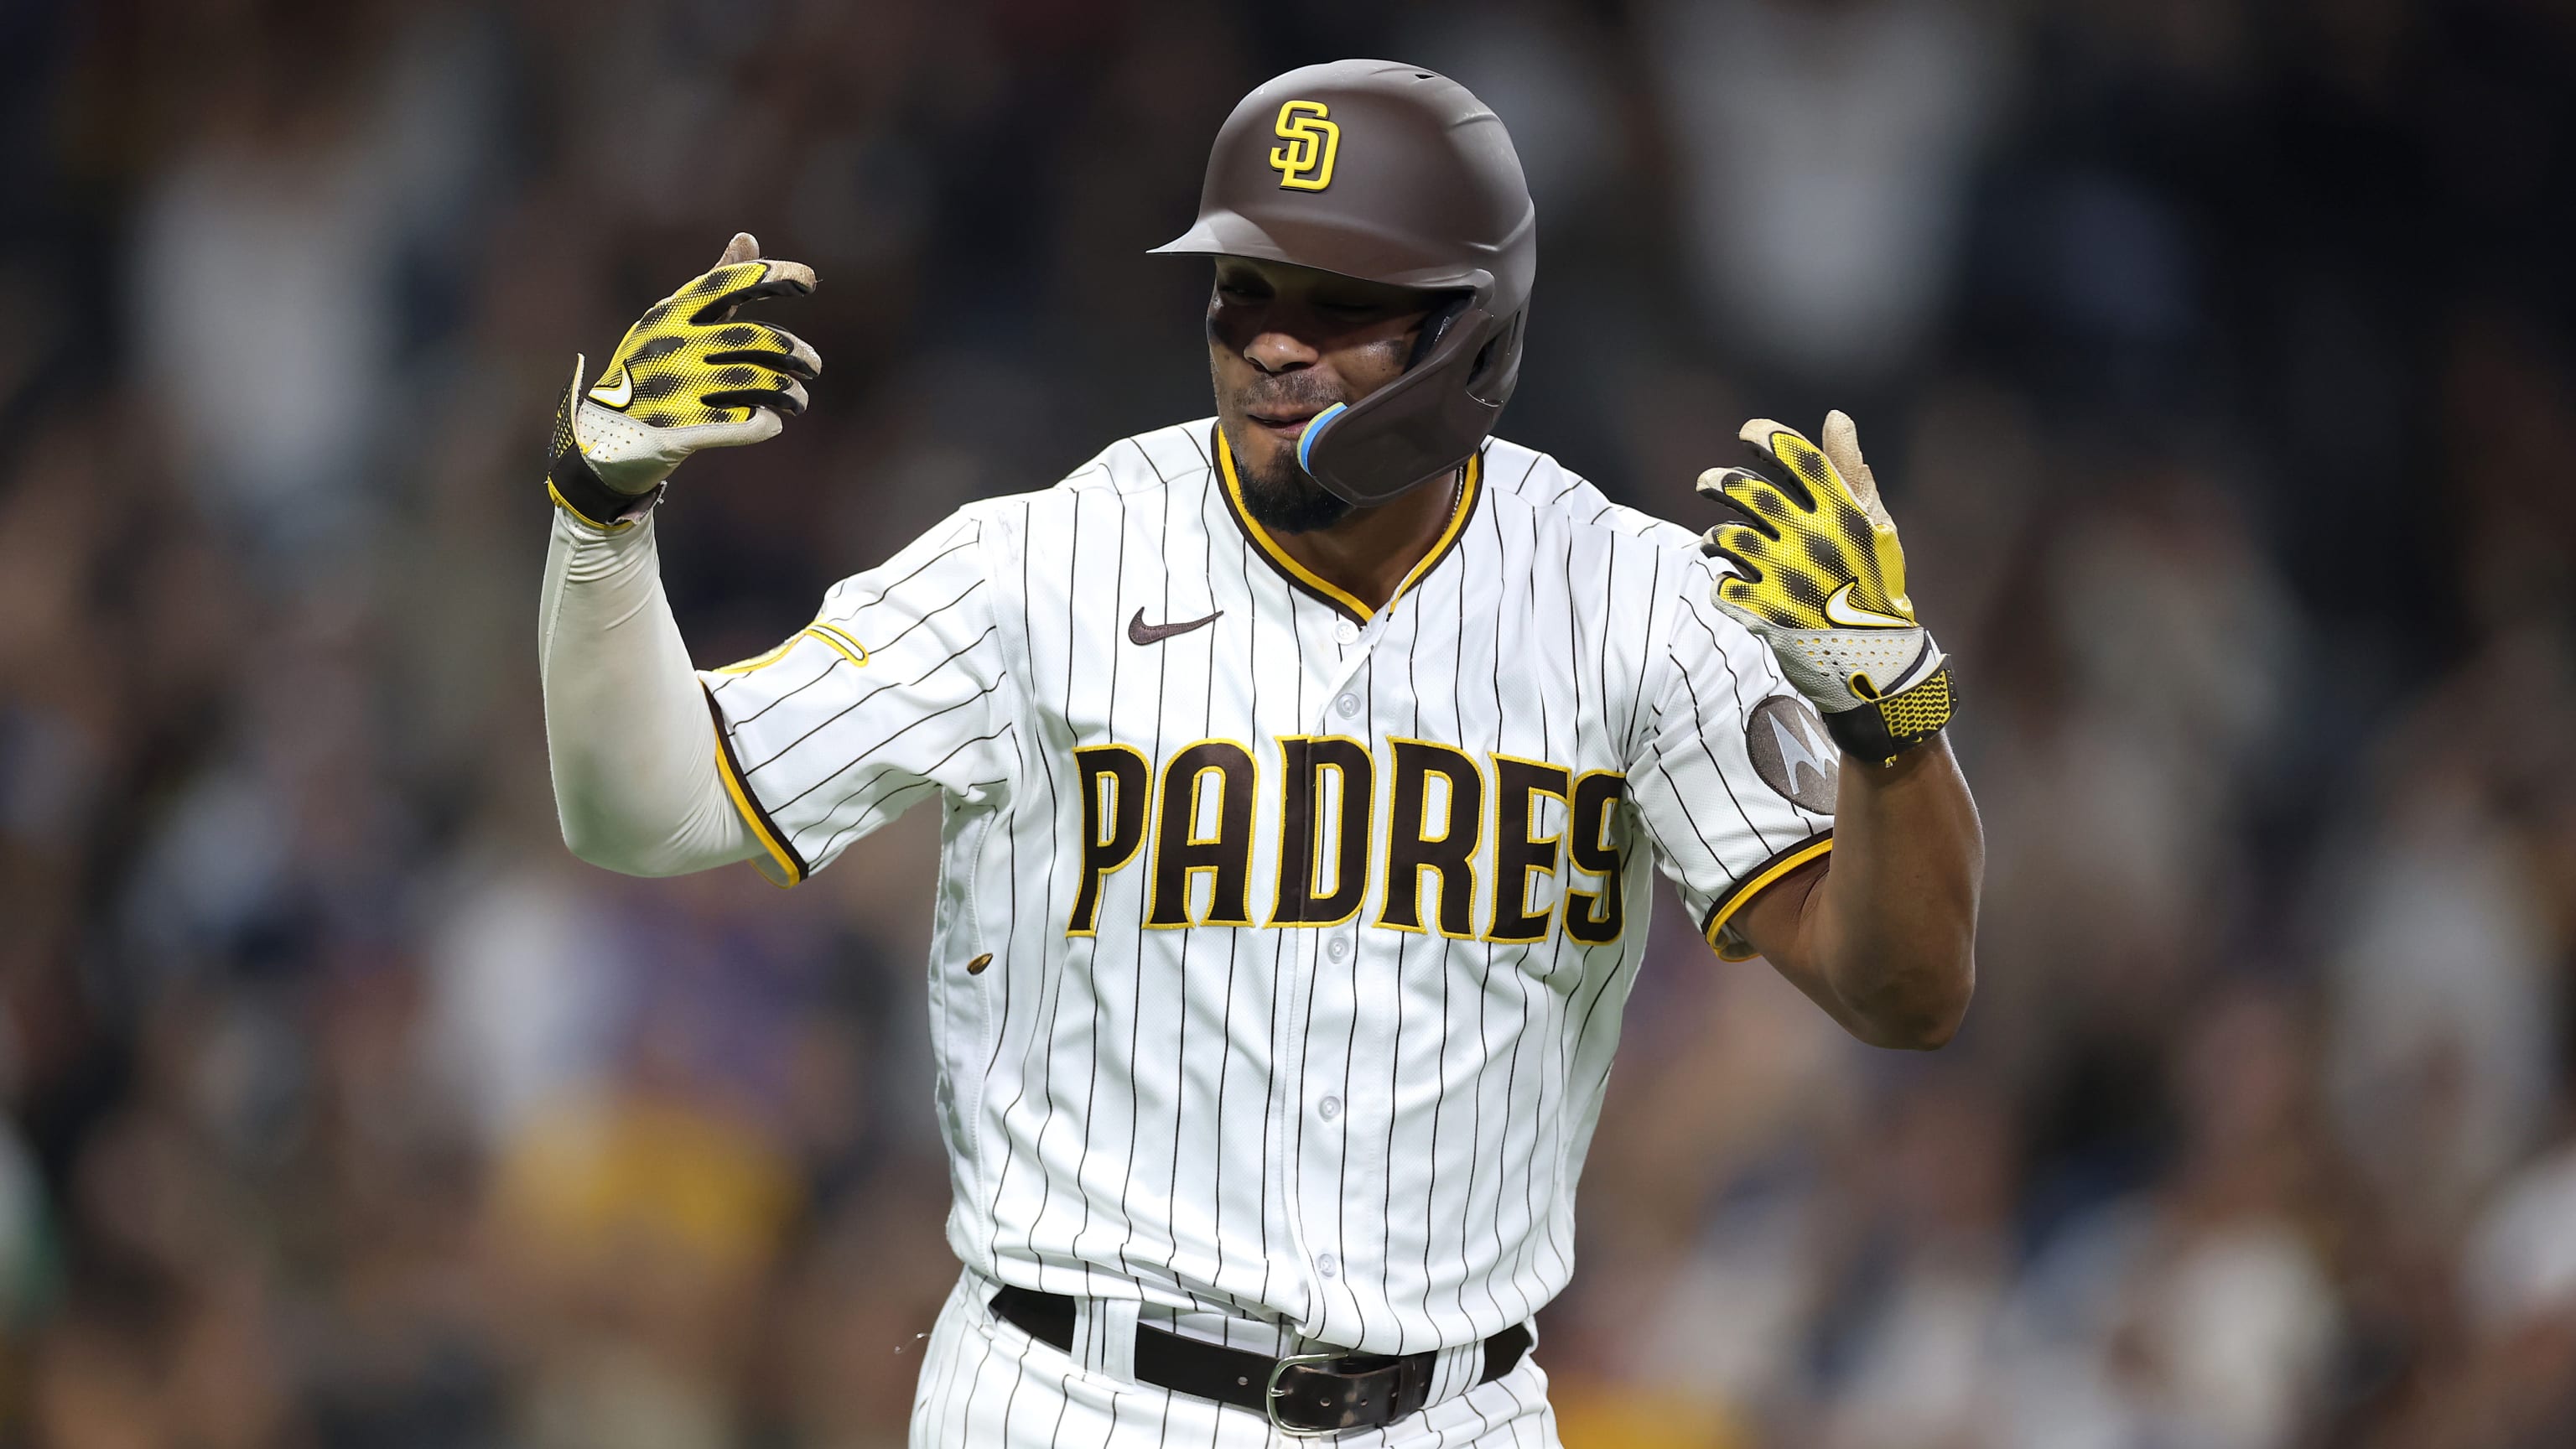 Snell pitches 7 hitless innings and Ks 10 as the Padres top the Rockies 2-0  on Bogaerts' homer